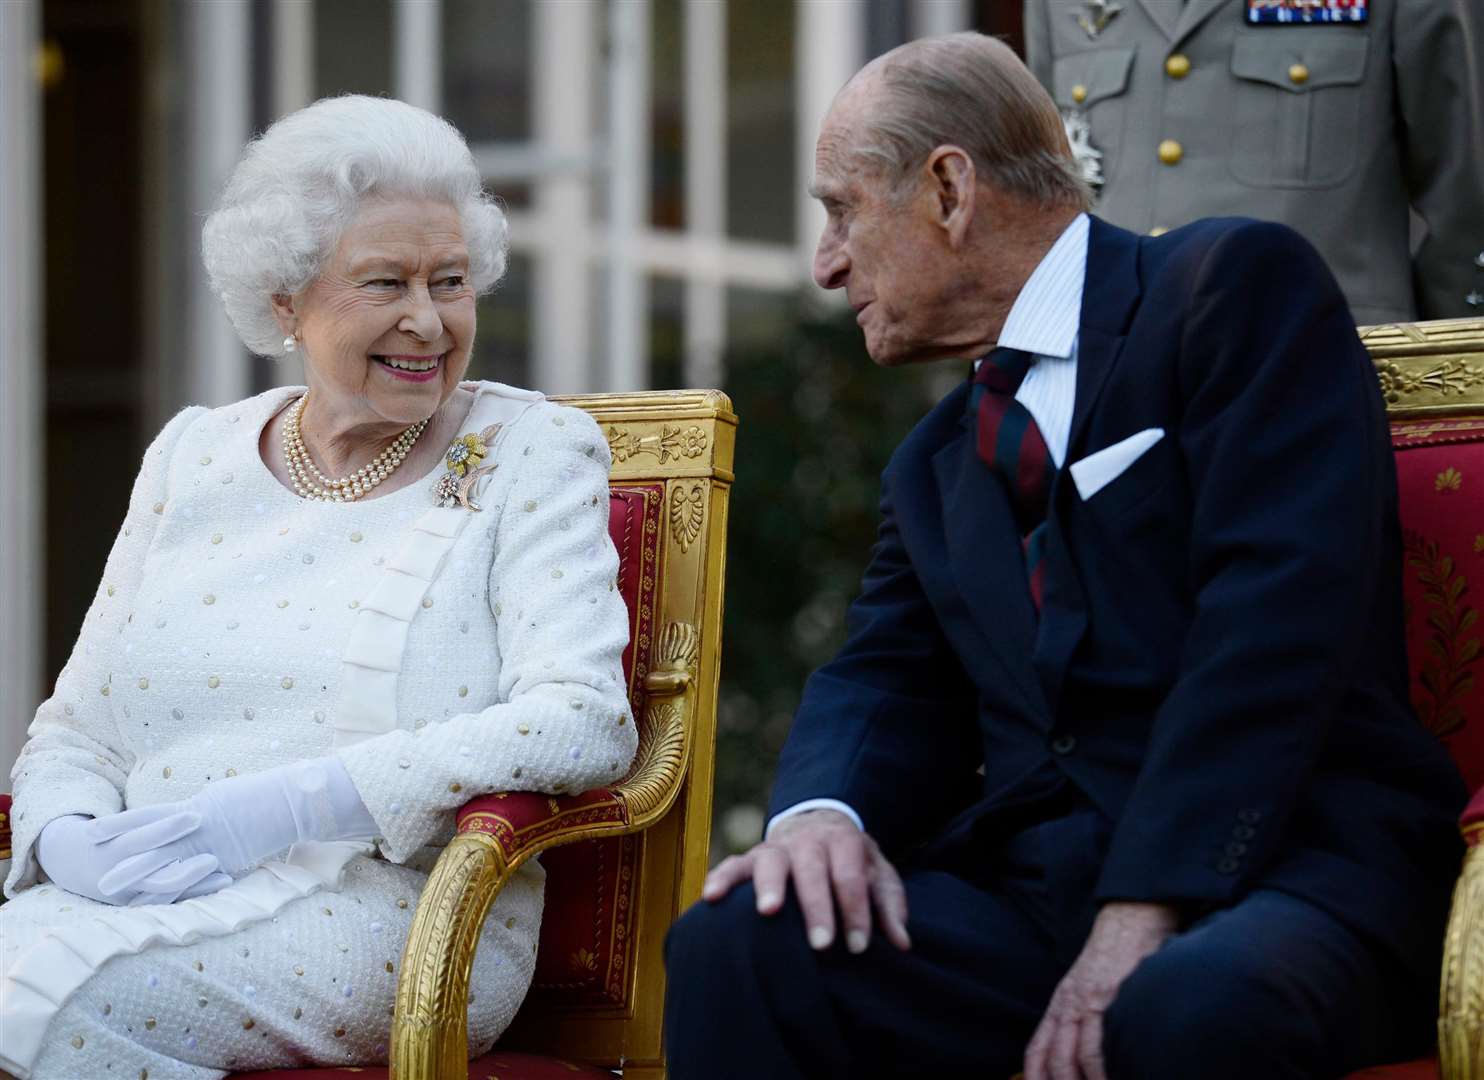 The Queen and the Duke of Edinburgh were married for more than 73 years. Picture: Owen Humphreys/PA